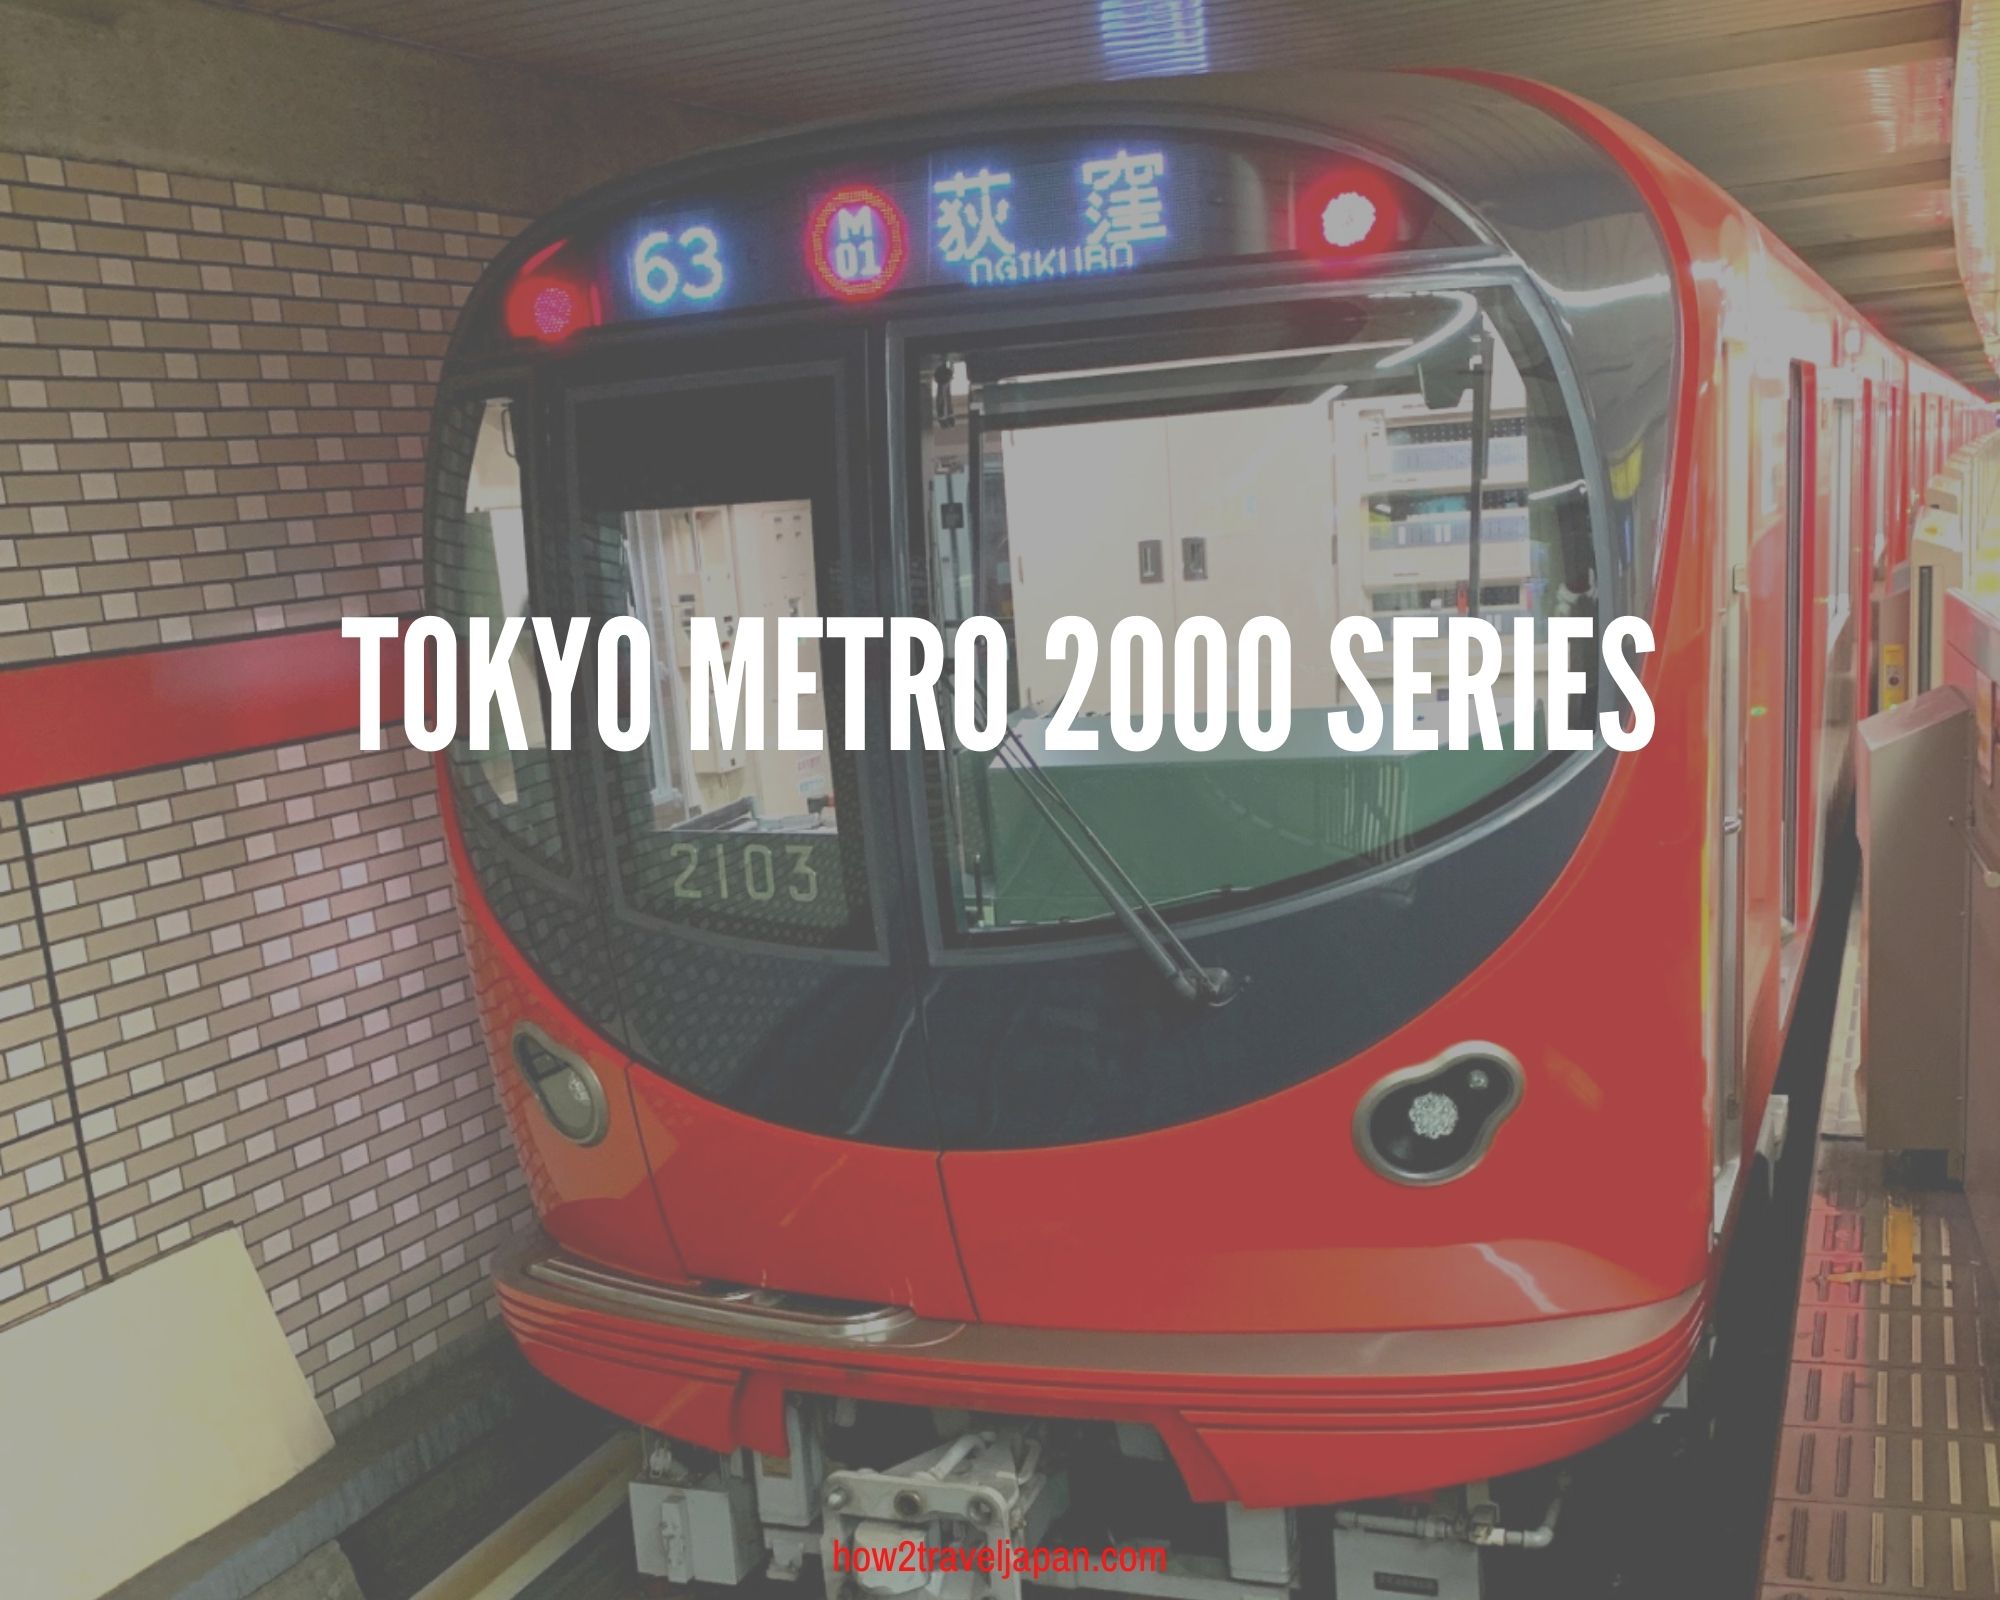 You are currently viewing Tokyo Metro 2000 series “Marunouchi line”